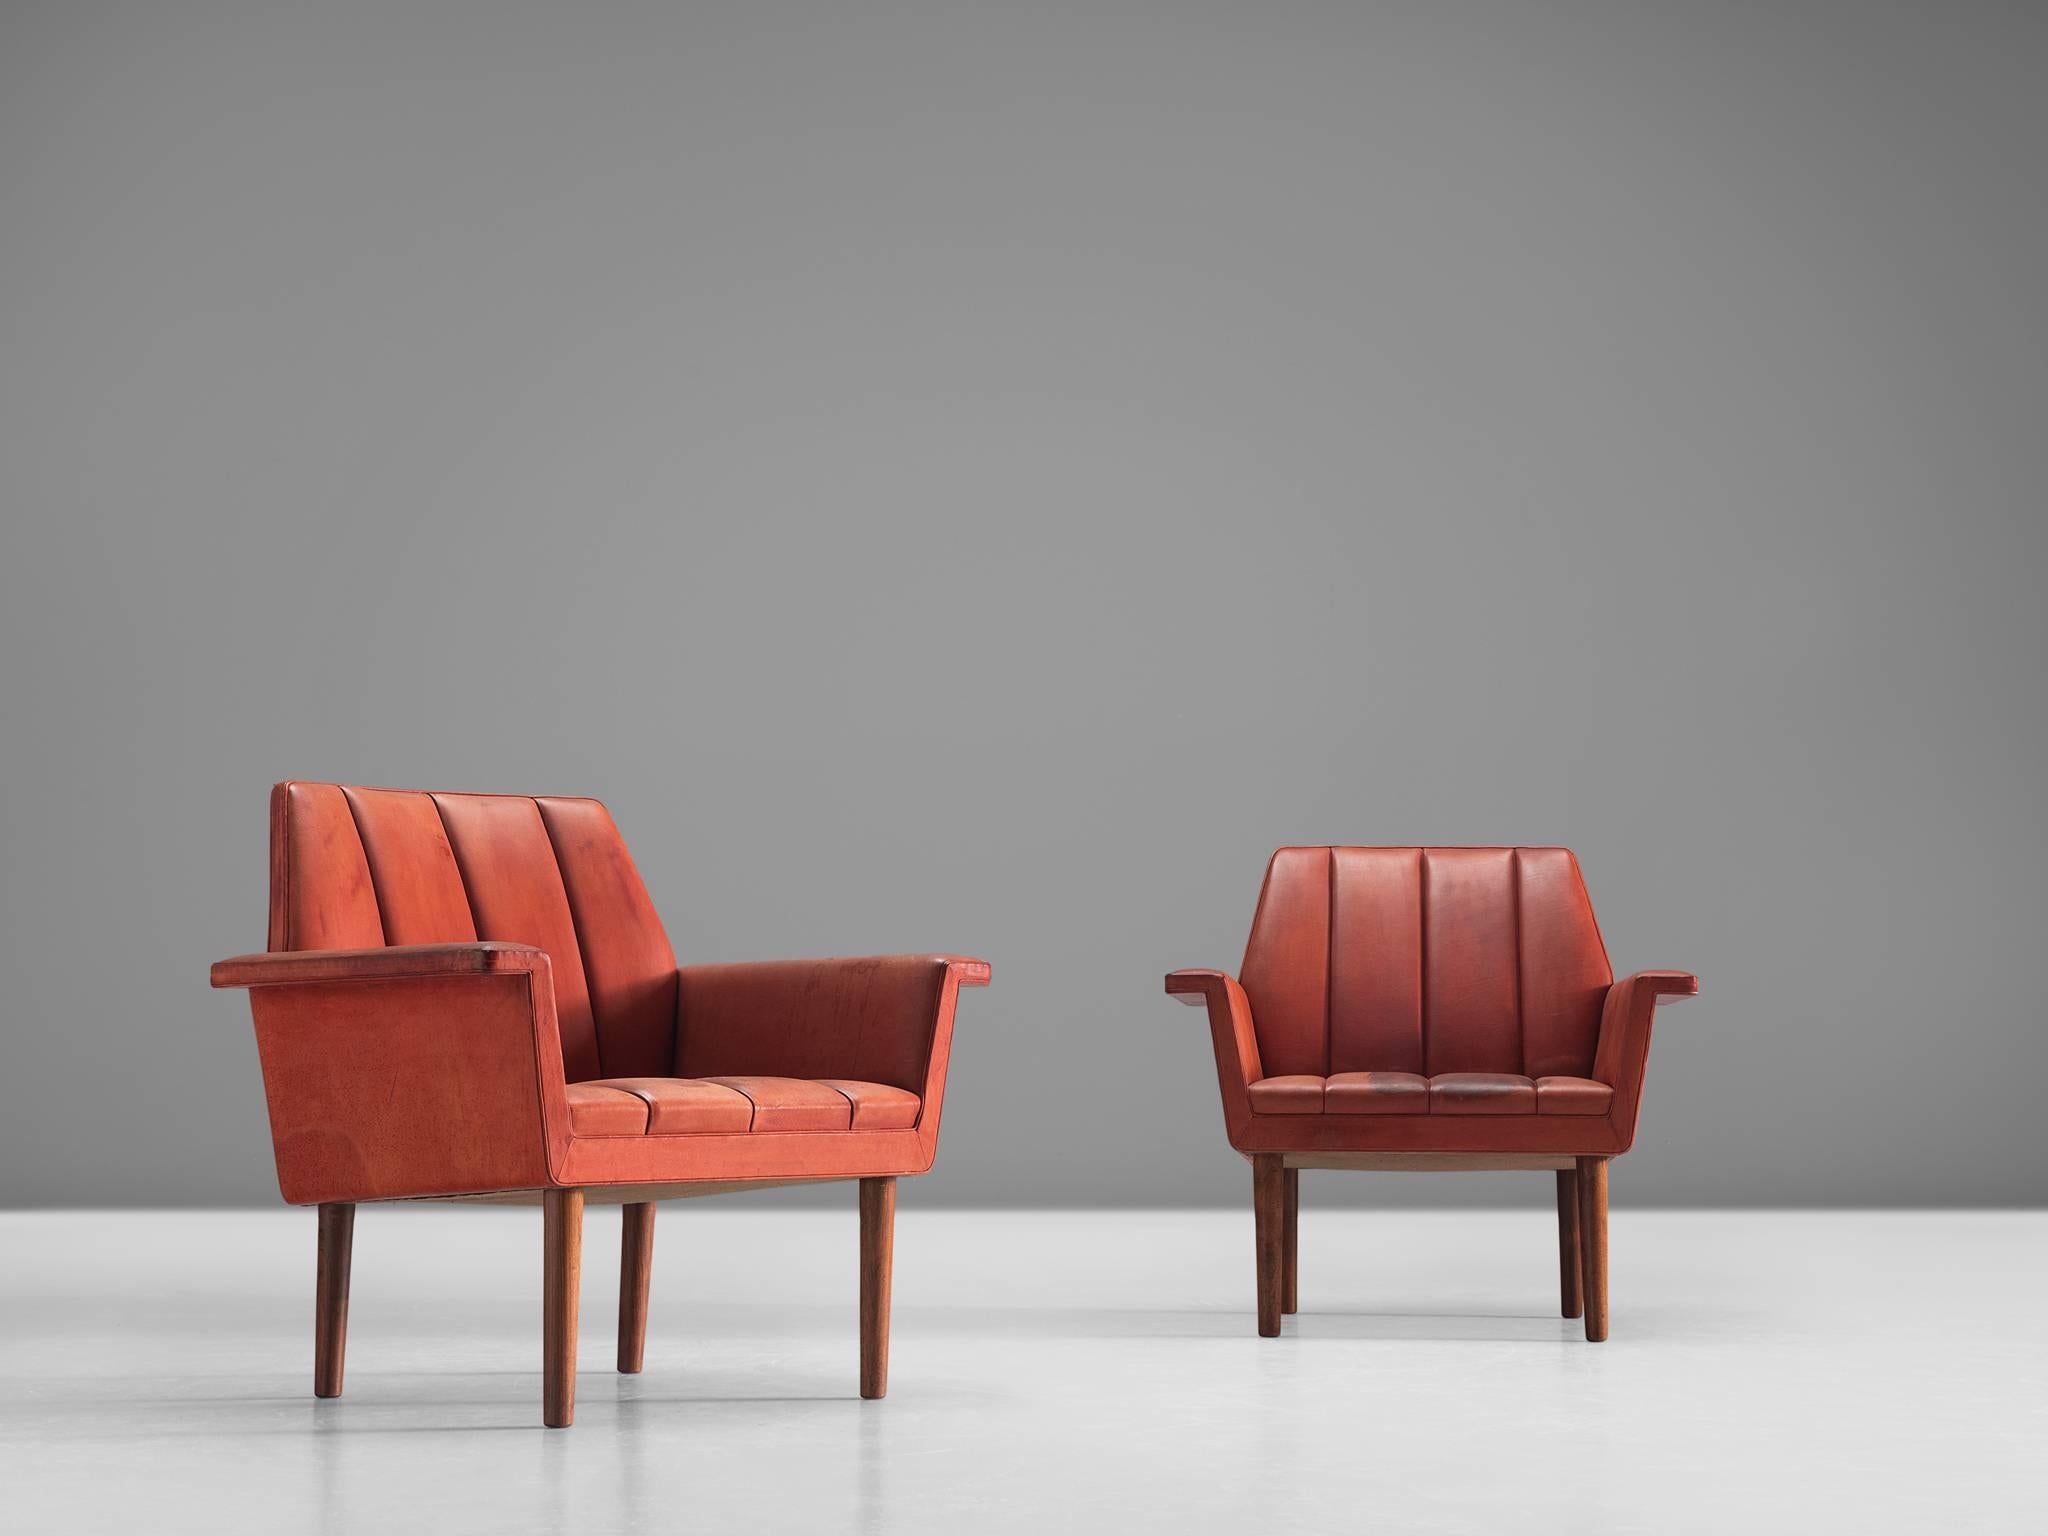 Set of two armchairs, in red leather and wood by Helge Vestergaard-Jensen for Peder Pedersen, Denmark, 1960. 

Pair of red leather armchairs that stand high on their wooden legs, these chairs have a stately appearance. The seating is simplistic with